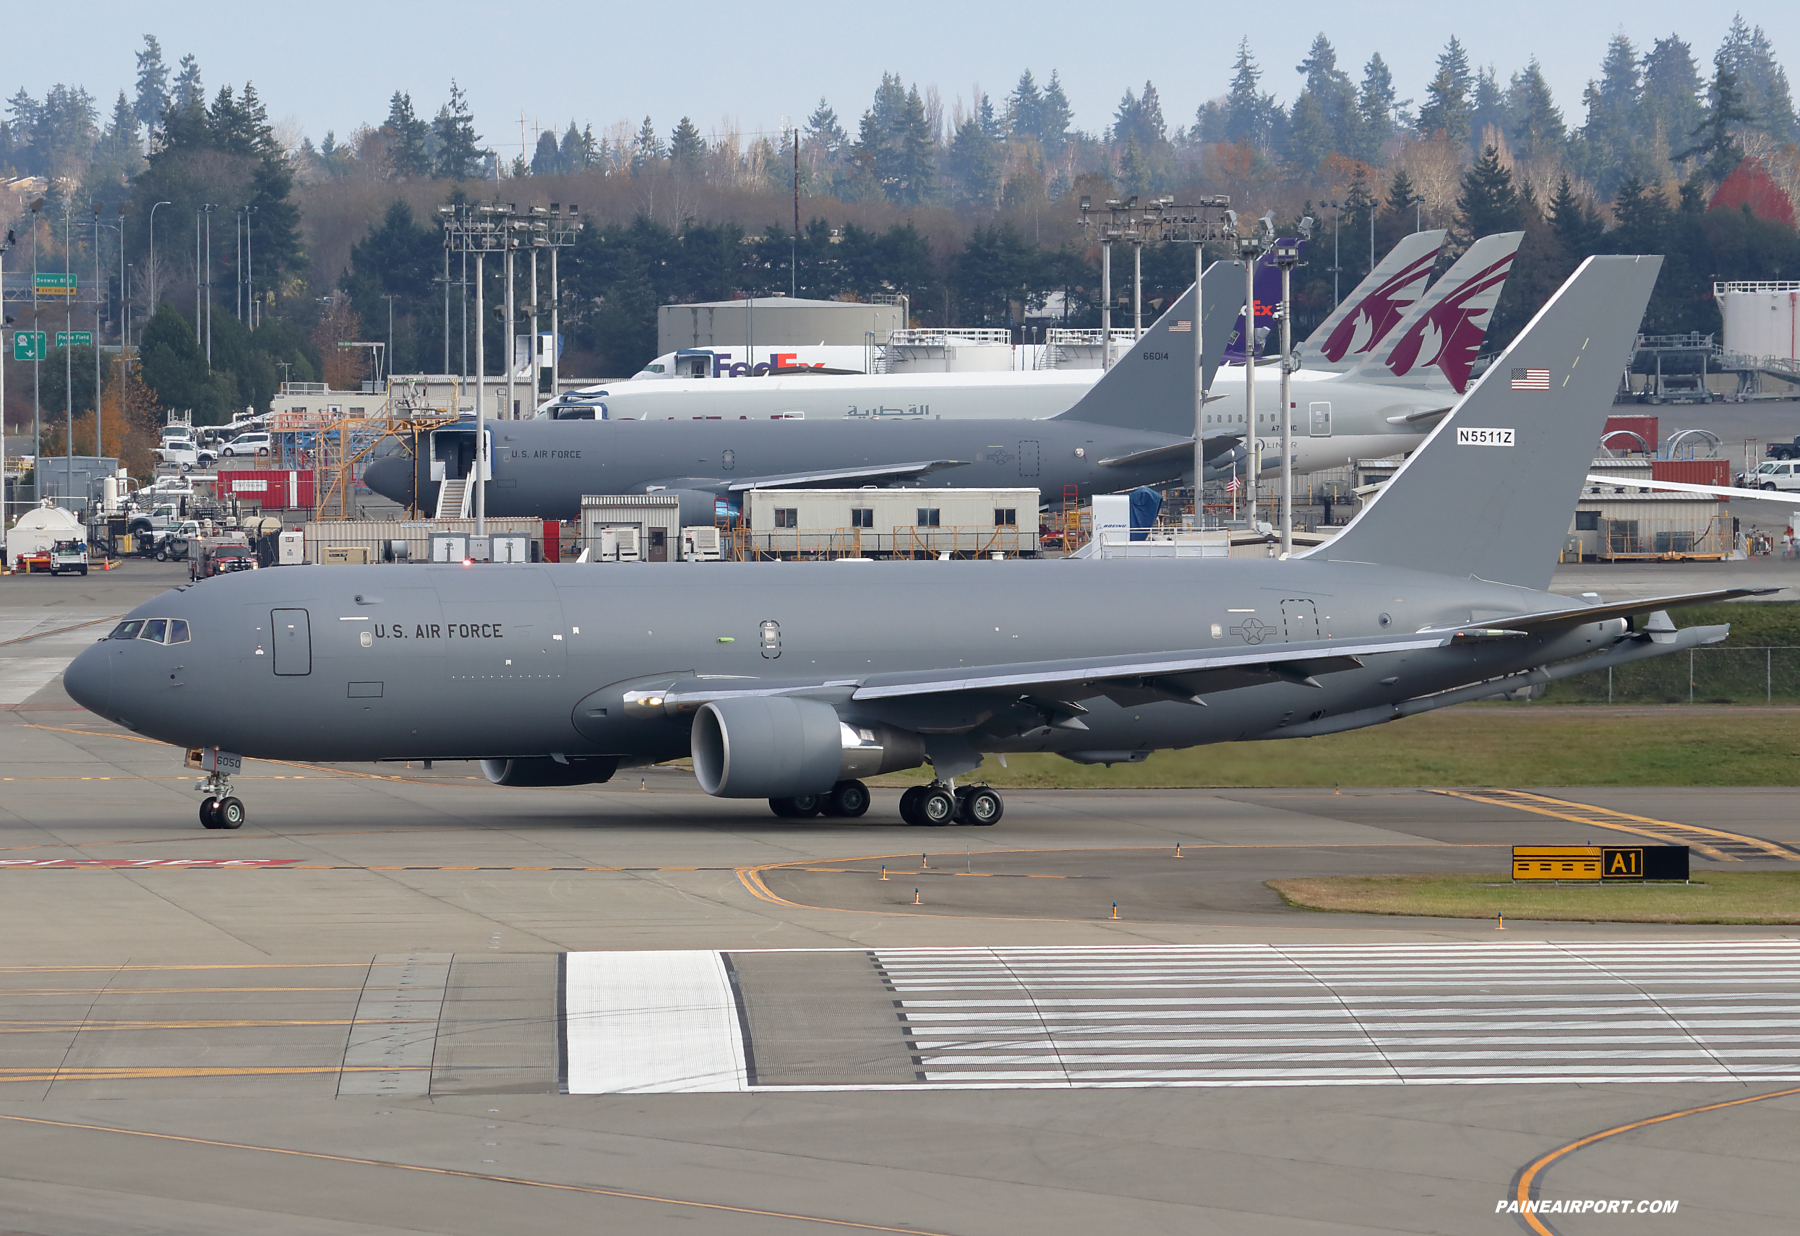 KC-46A 18-46050 at Paine Field